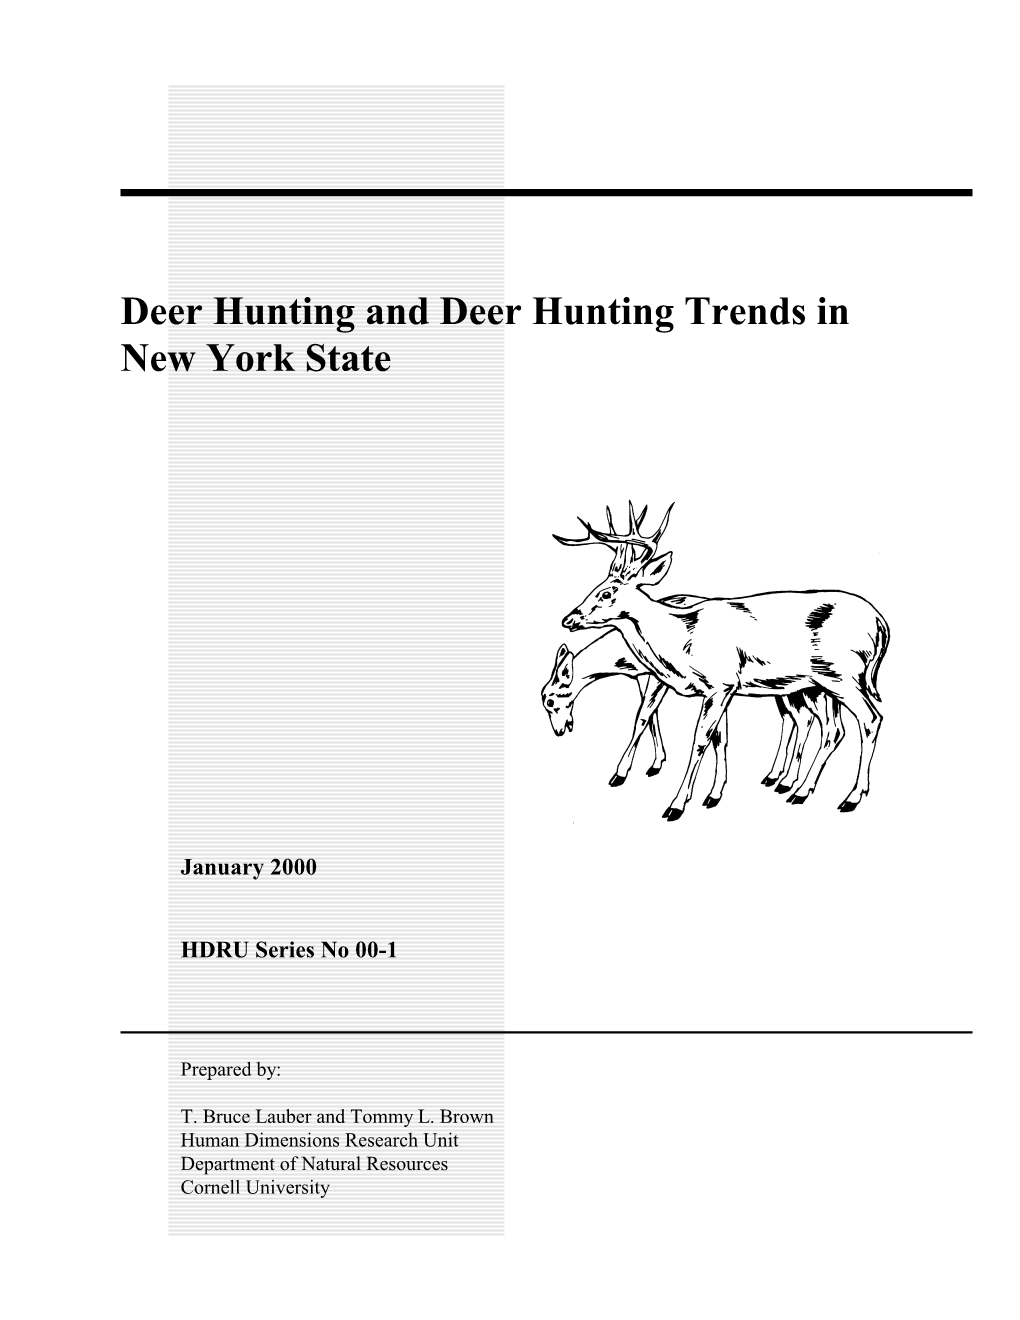 Deer Hunting and Deer Hunting Trends in New York State